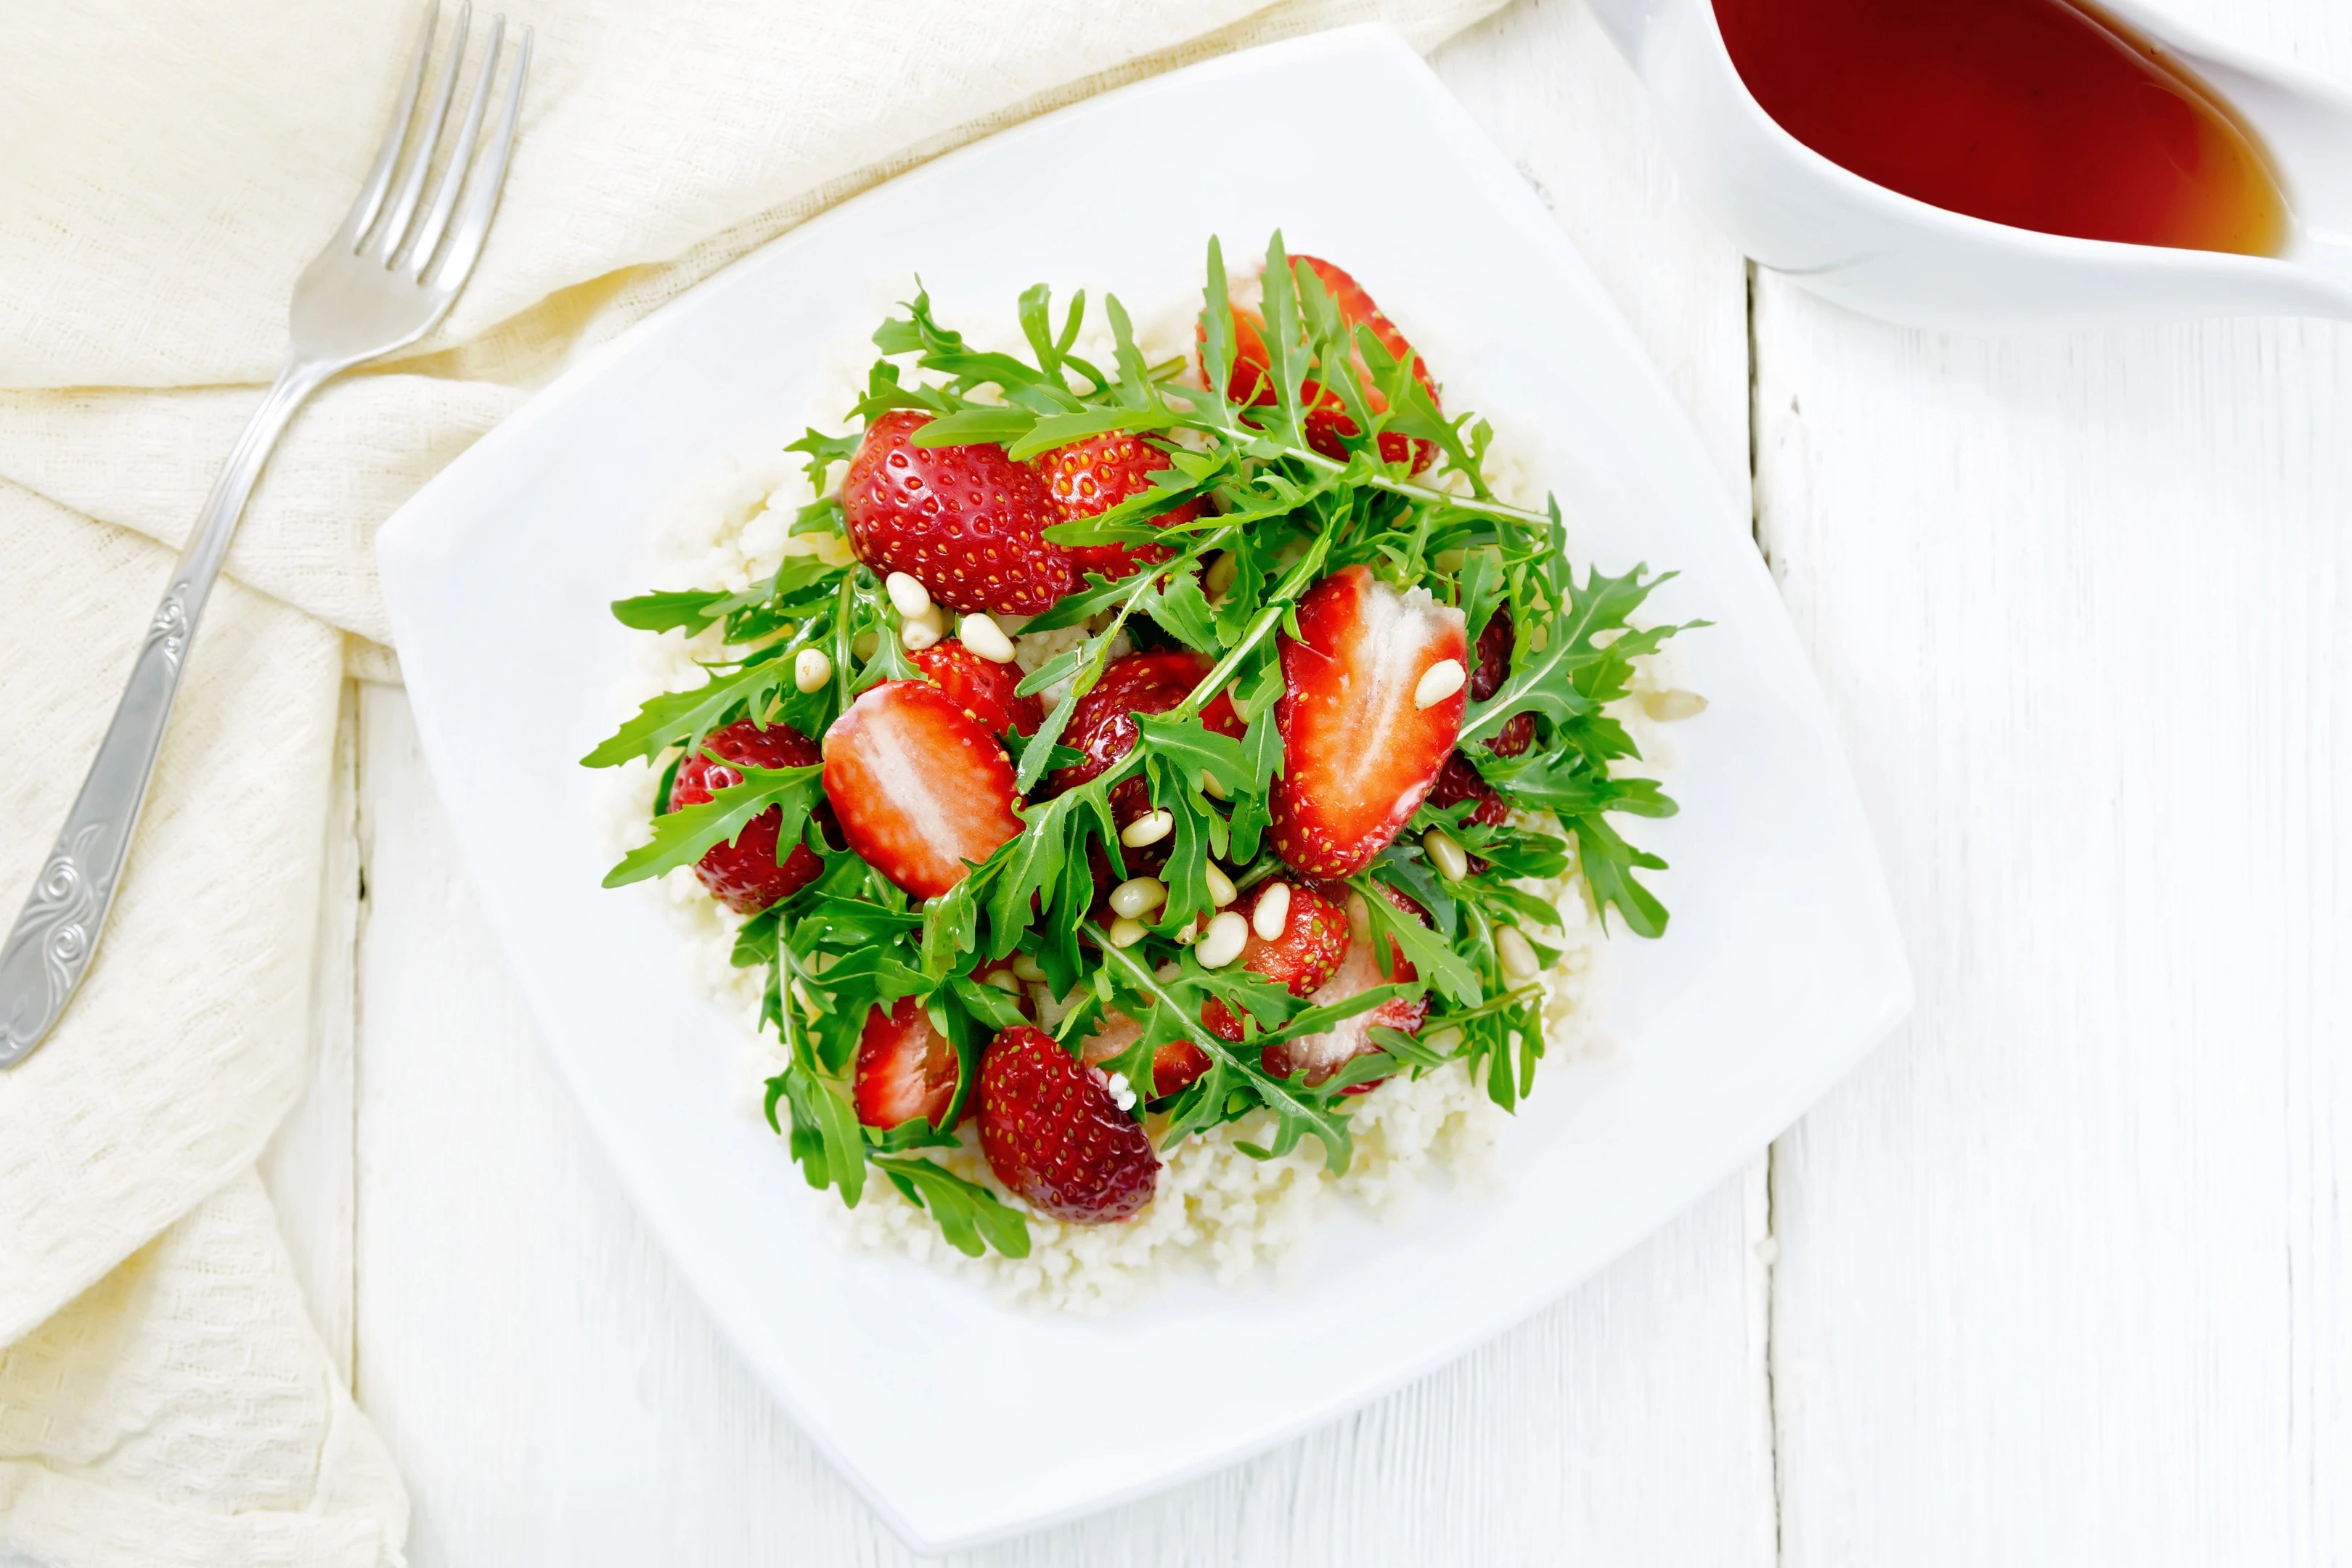 Strawberry couscous with arugula salad dressed with fruit vinegar